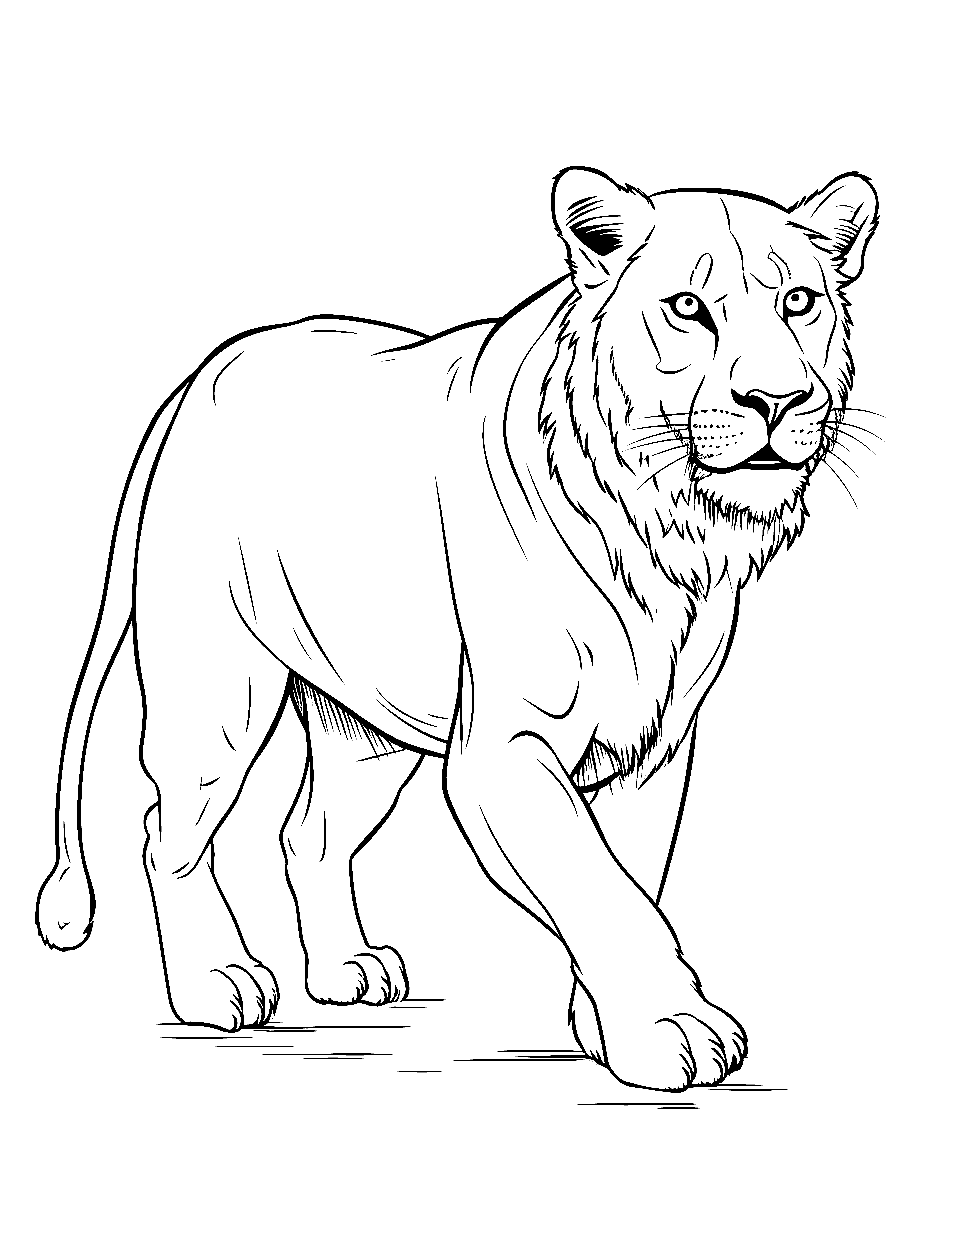 Female Lion Hunt Coloring Page - A lioness stealthily approaching her prey.